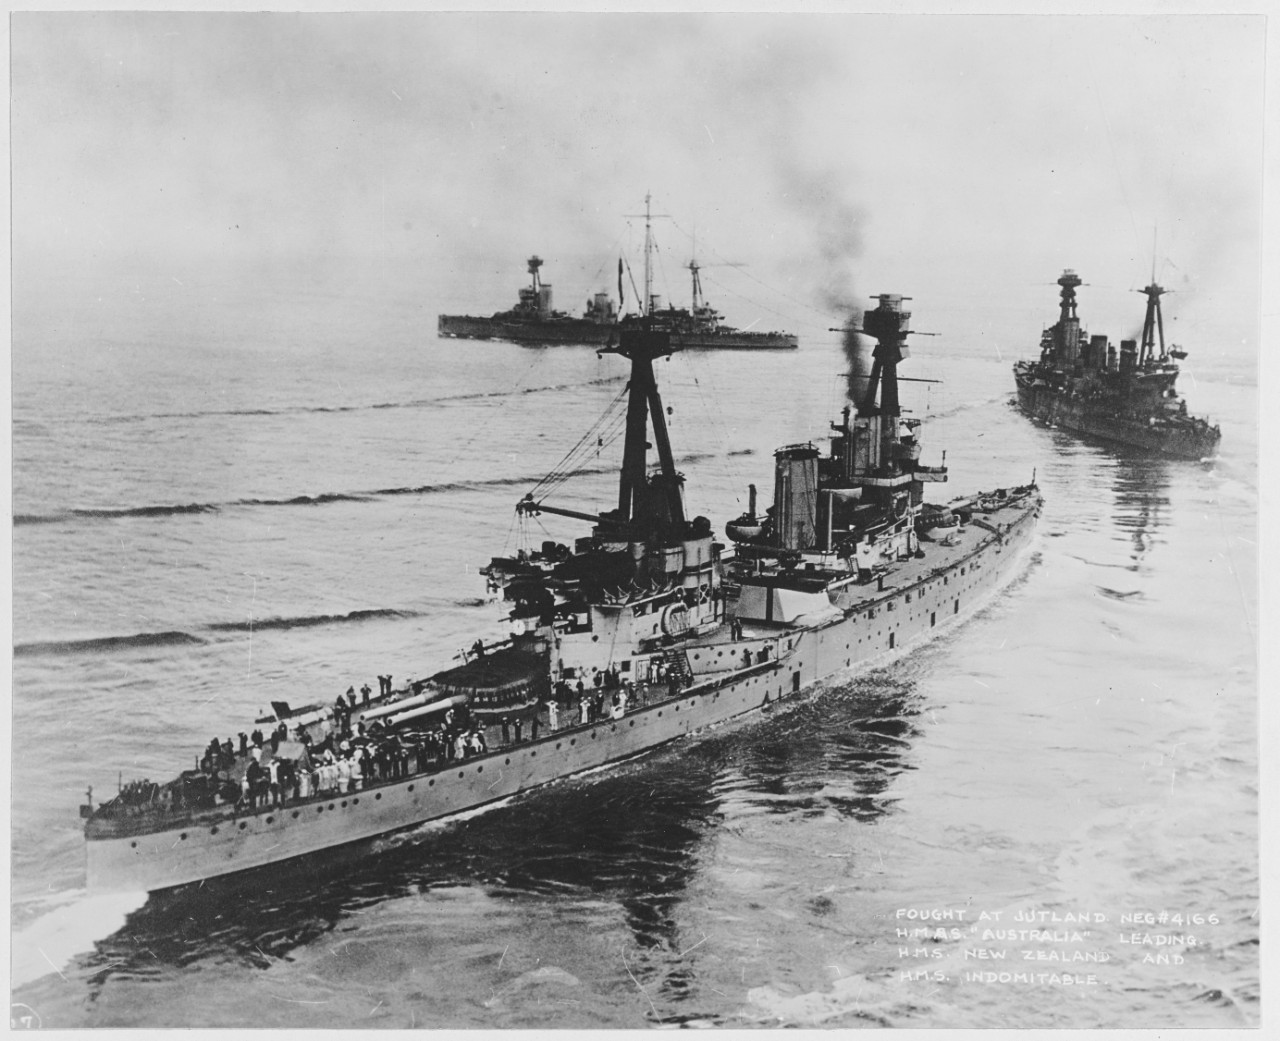 Photo #: 19-N-4166  &quot;British Battlecruisers that Fought at Jutland&quot; Reproductions of this image may also be available through the National Archives photographic reproduction system. For a MEDIUM RESOLUTION IMAGE, click the thumbnail.